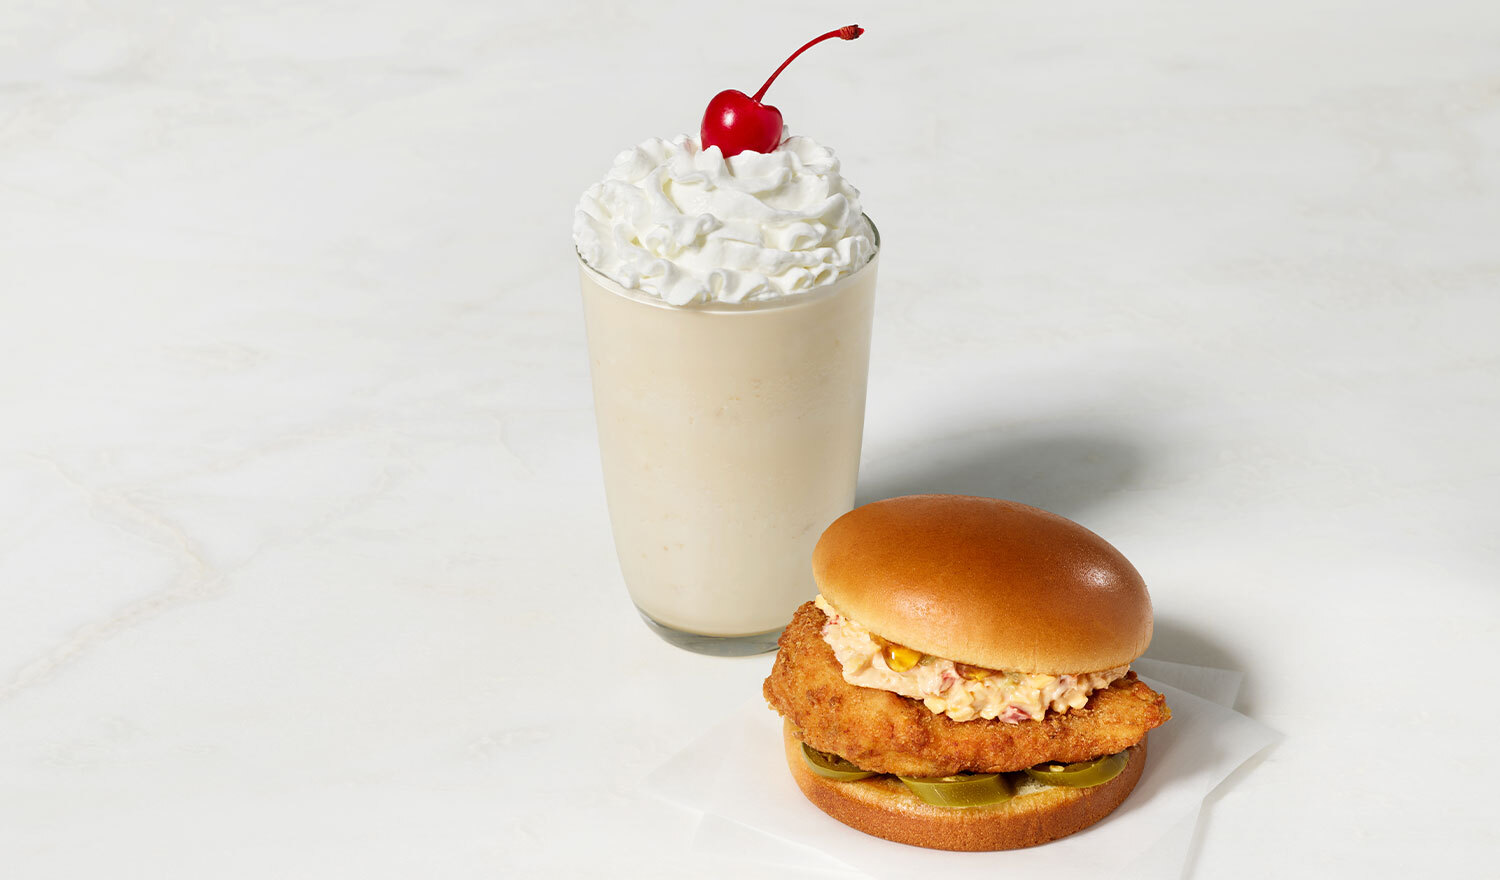 The Honey Pepper Pimento Chicken Sandwich and Caramel Crumble Milkshake will join Chick-fil-A menus nationwide beginning August 28.